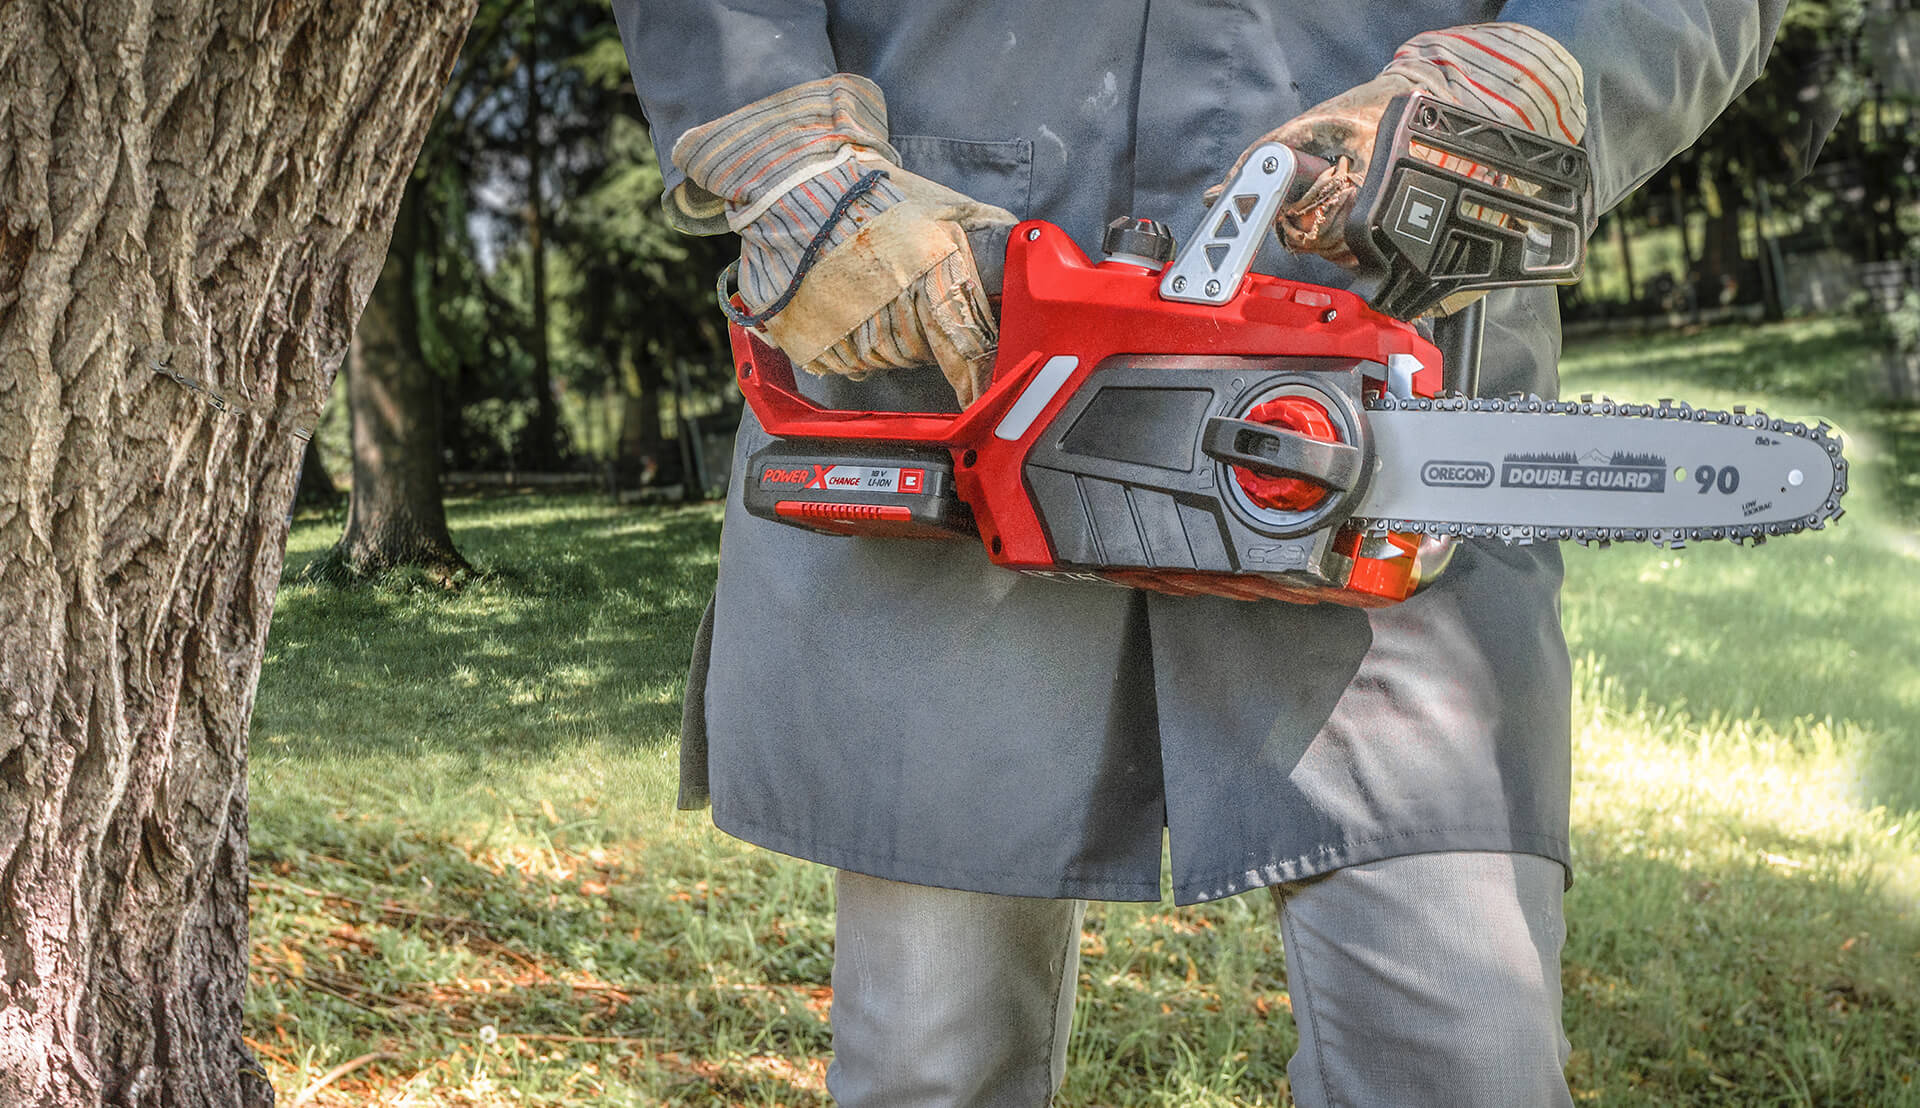 https://www.einhell.de/fileadmin/corporate-media/blog/workshop/how-to-properly-maintain-and-clean-your-chainsaw/einhell-blog-chainsaw-maintenance-content-02.jpg